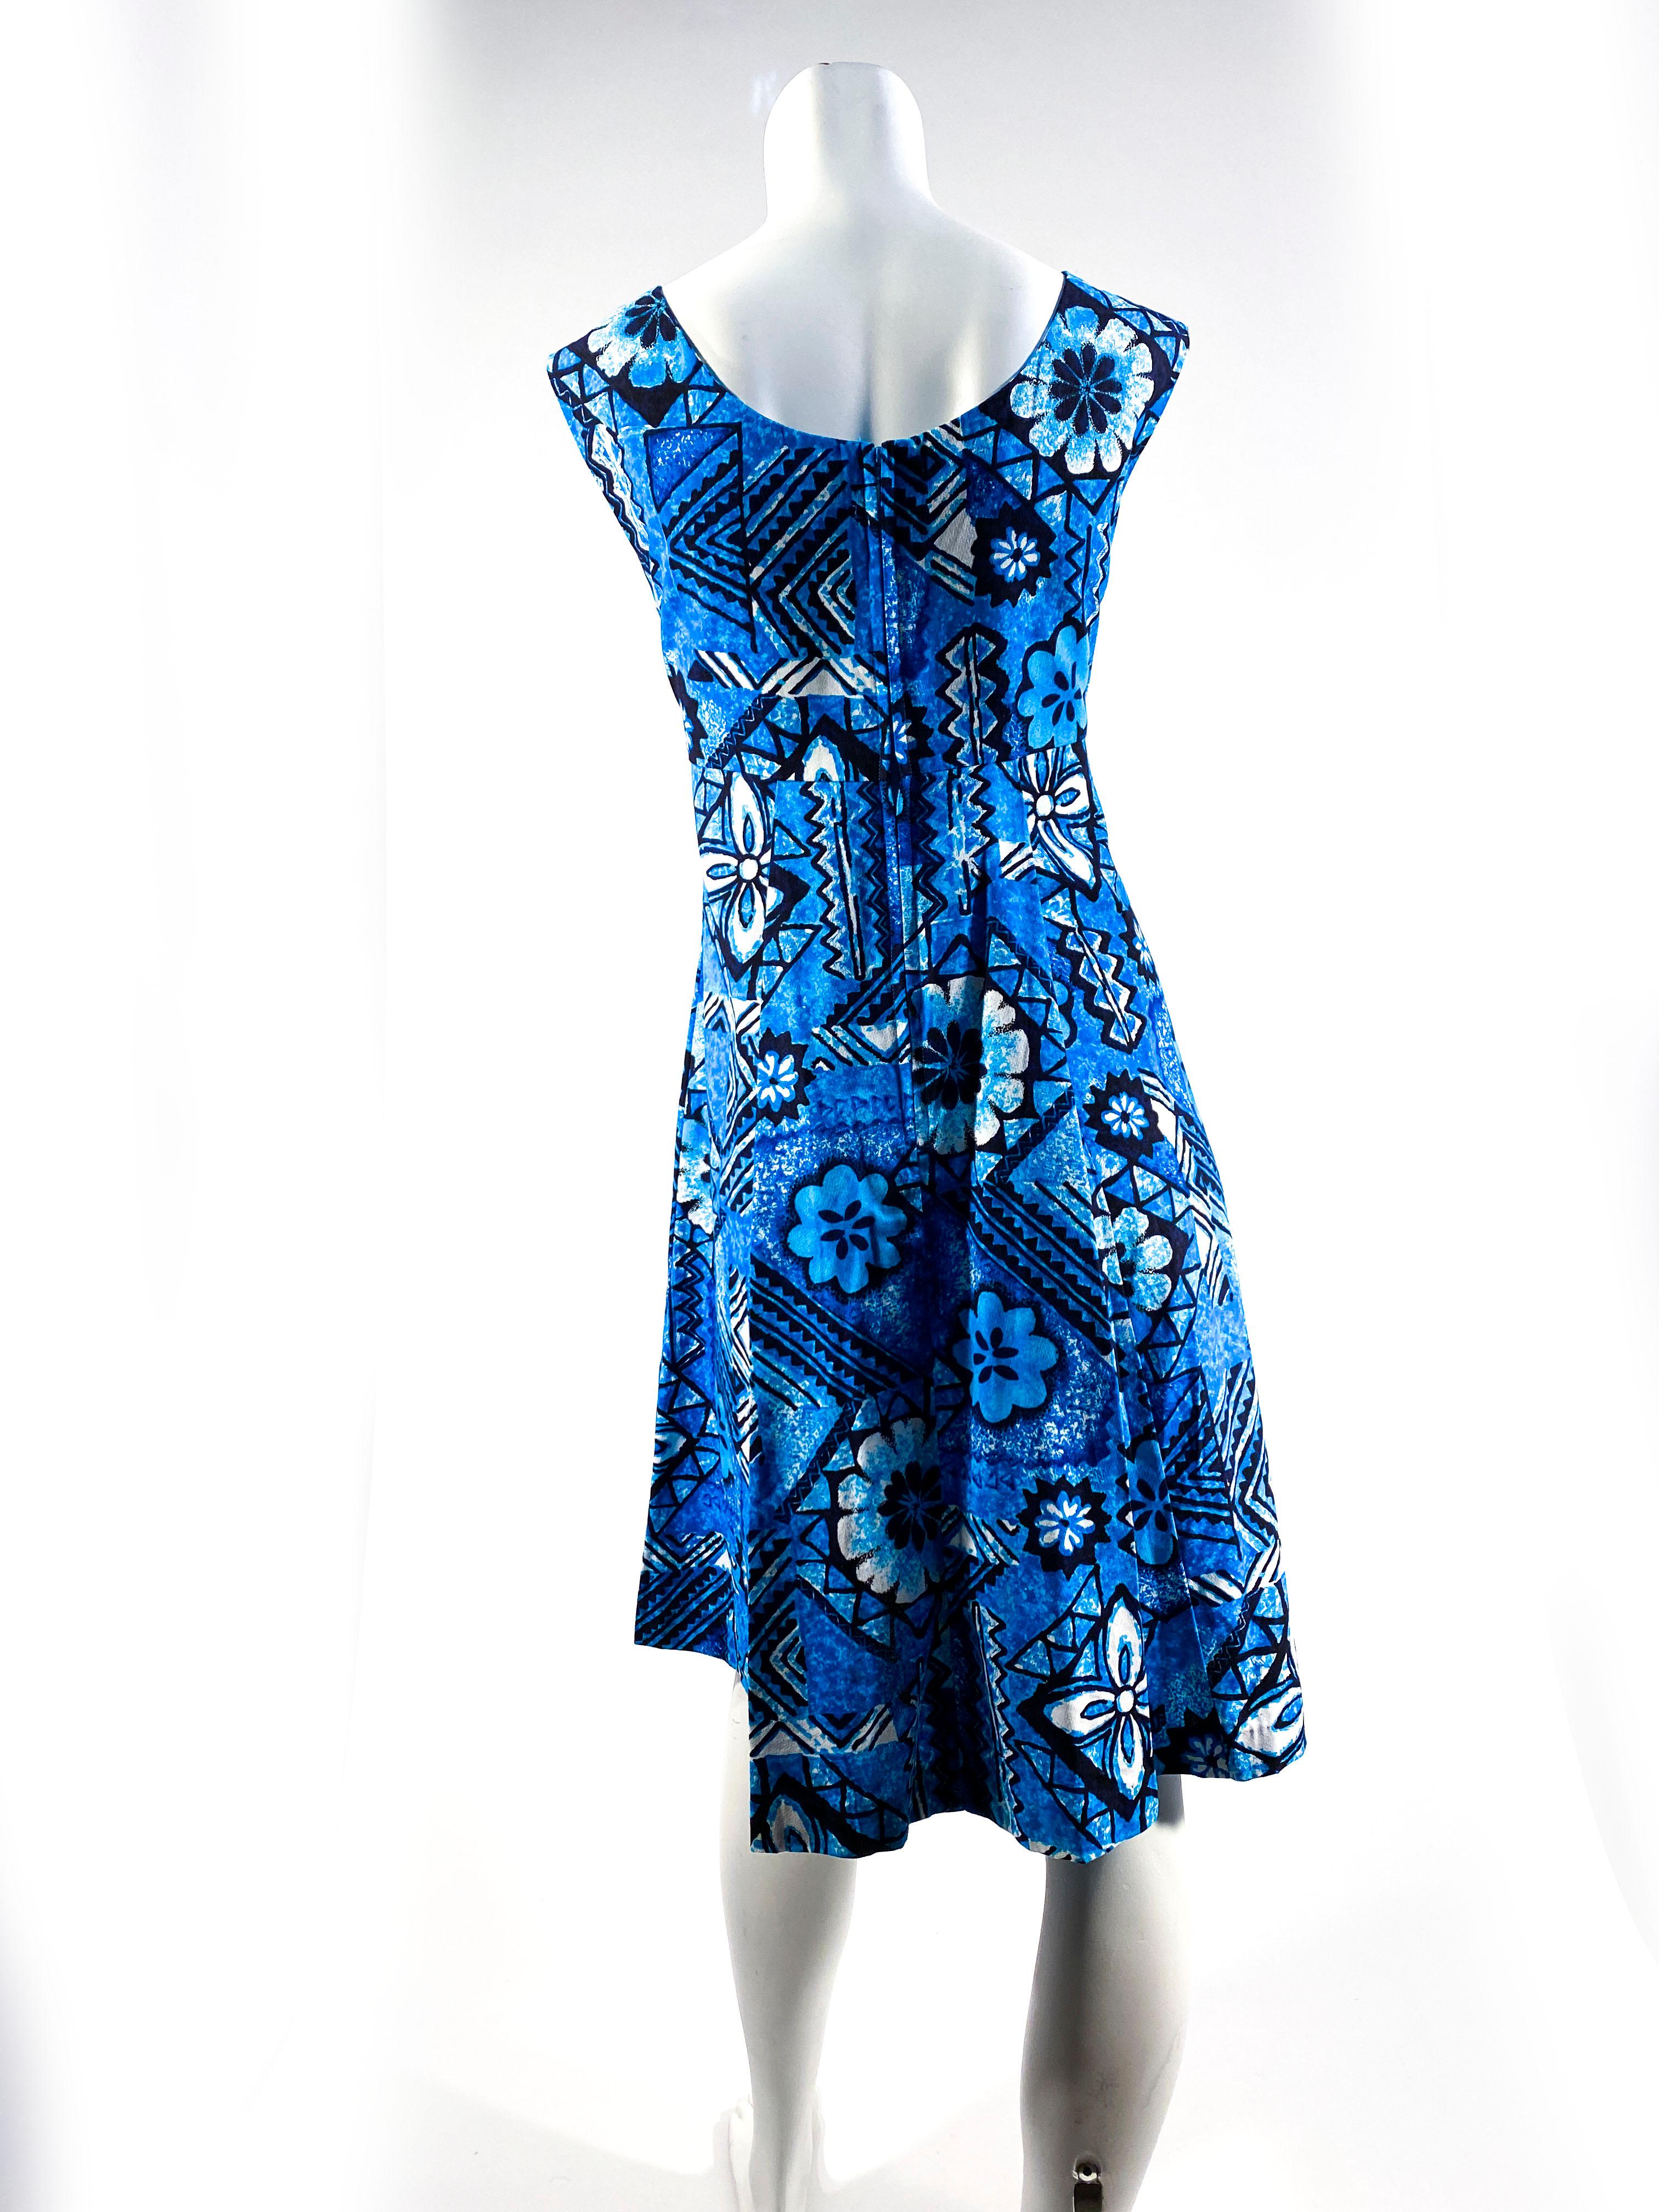 1960s Hawaiian/Geometric Printed Dress In Excellent Condition For Sale In San Francisco, CA